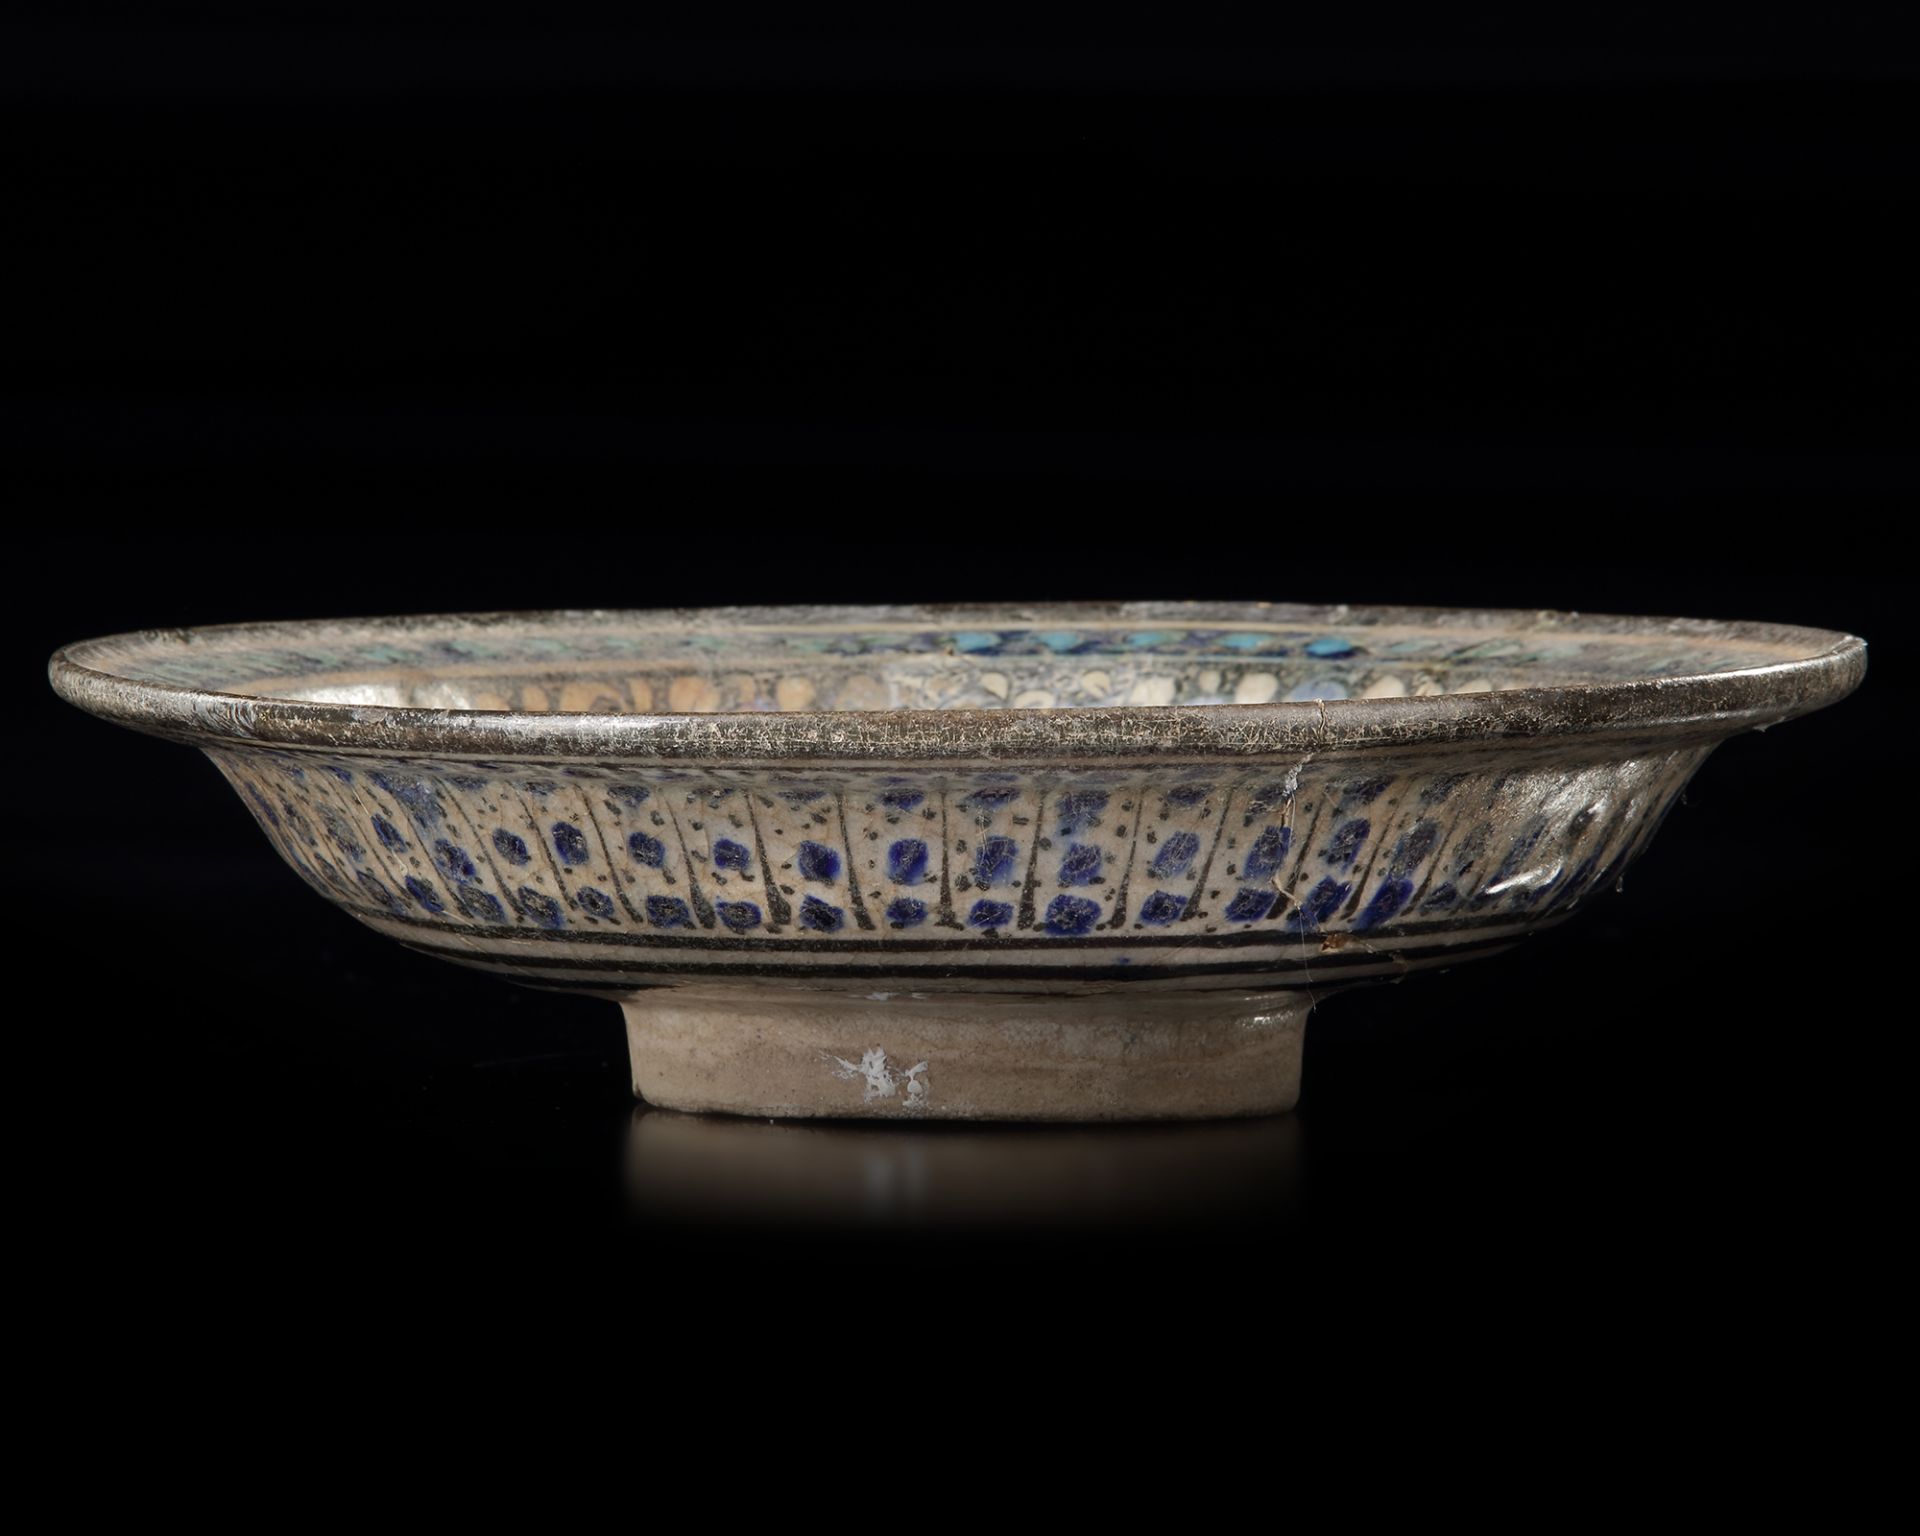 A SULTANABAD POTTERY DISH, NORTH PERSIA, LATE 13TH-EARLY 14TH CENTURY - Image 2 of 4